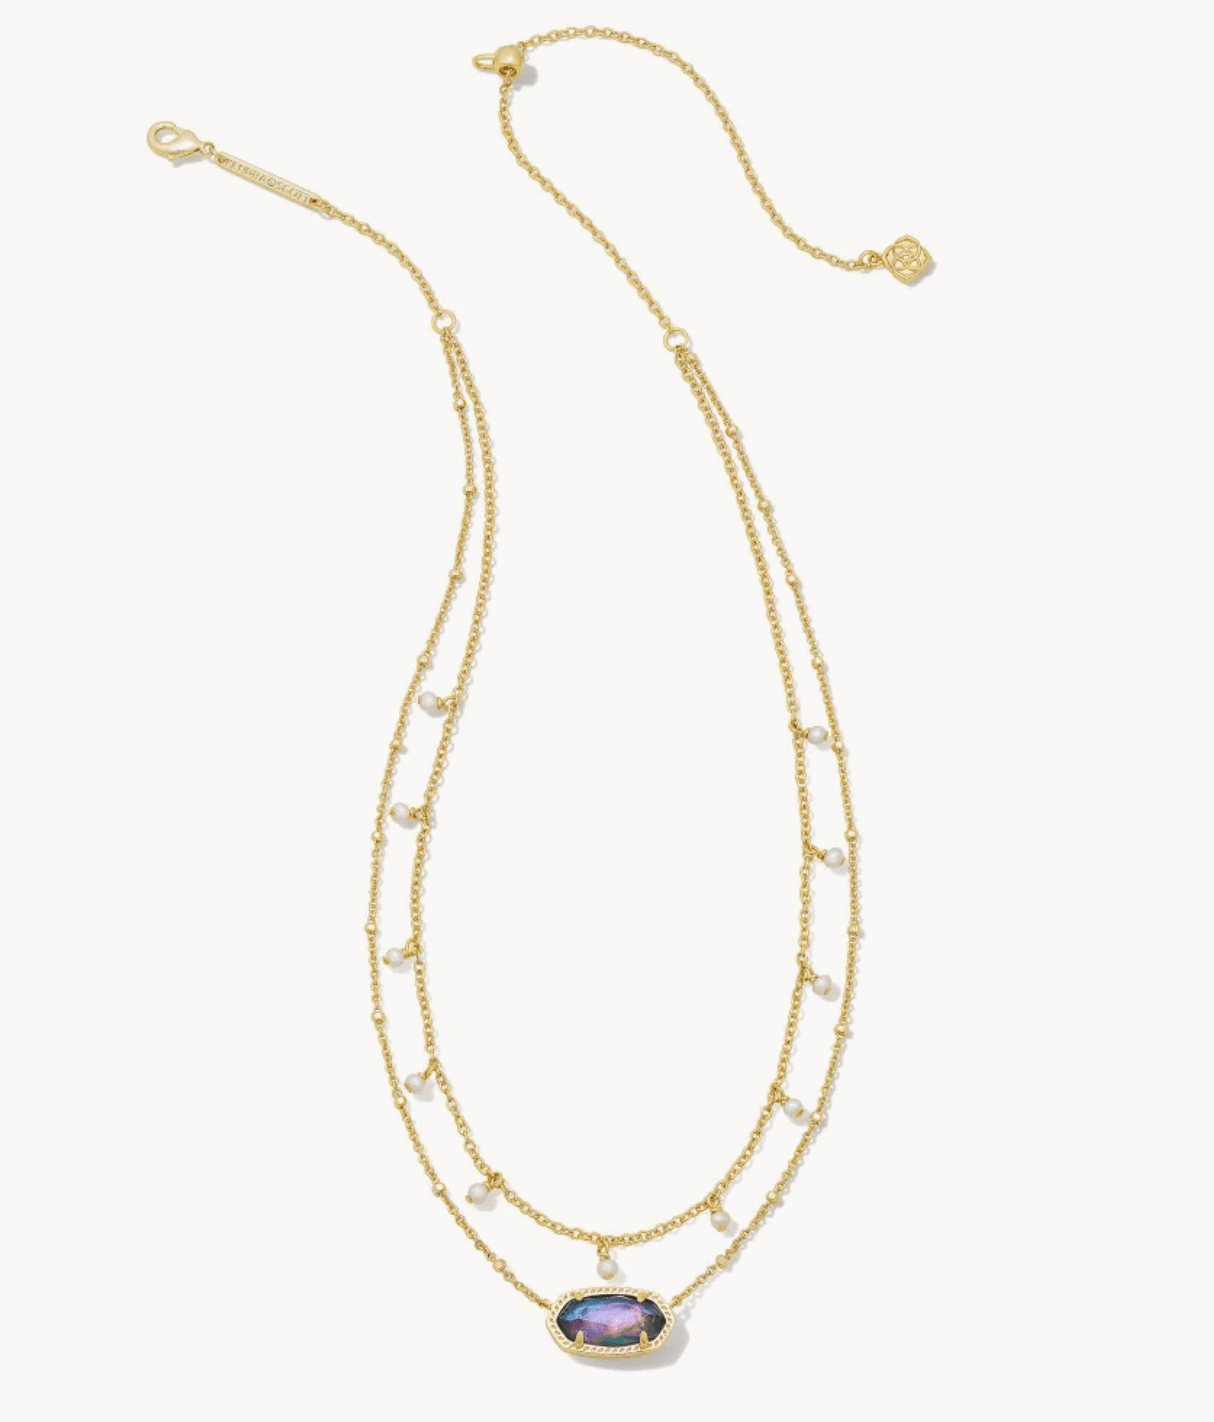 Kendra Scott - Elisa Gold Pearl Multi Strand Necklace in Lilac Abalone - Findlay Rowe Designs